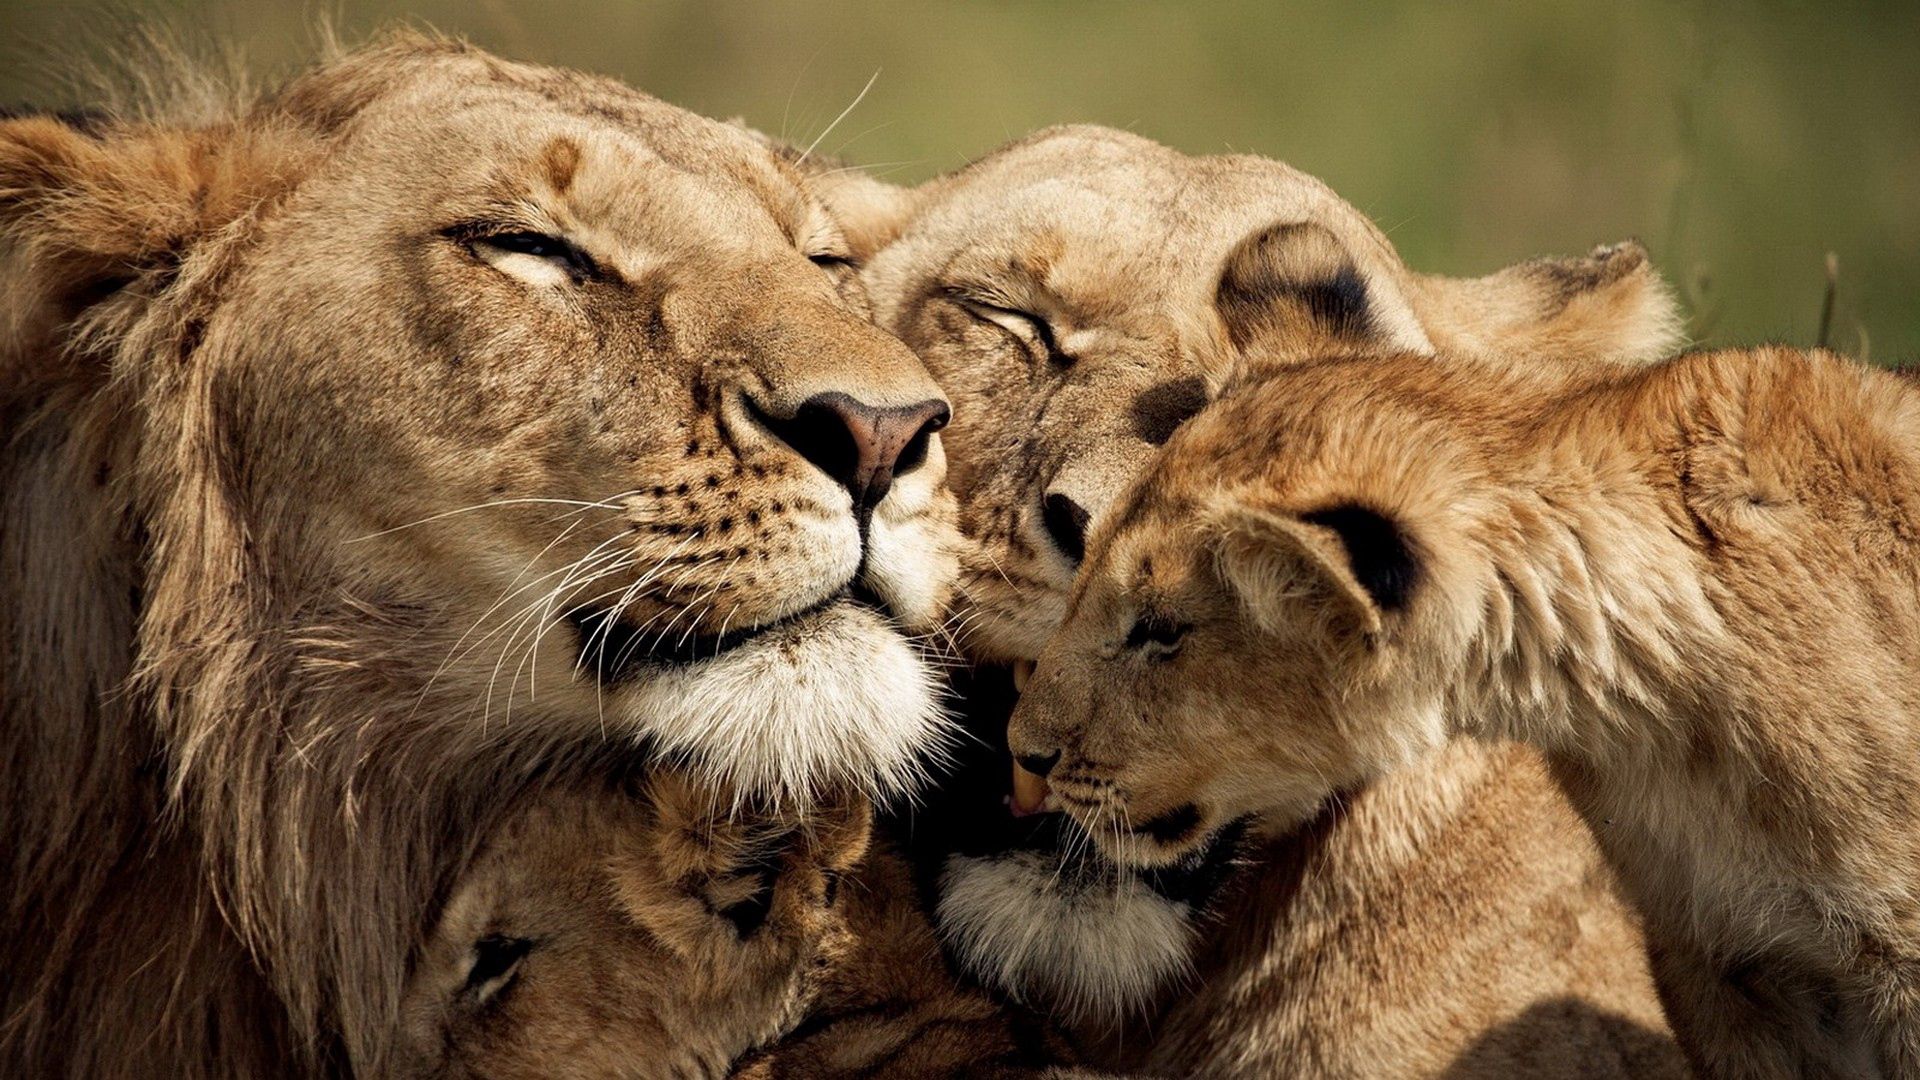 lions, animals, young, care, joey, tenderness, cute